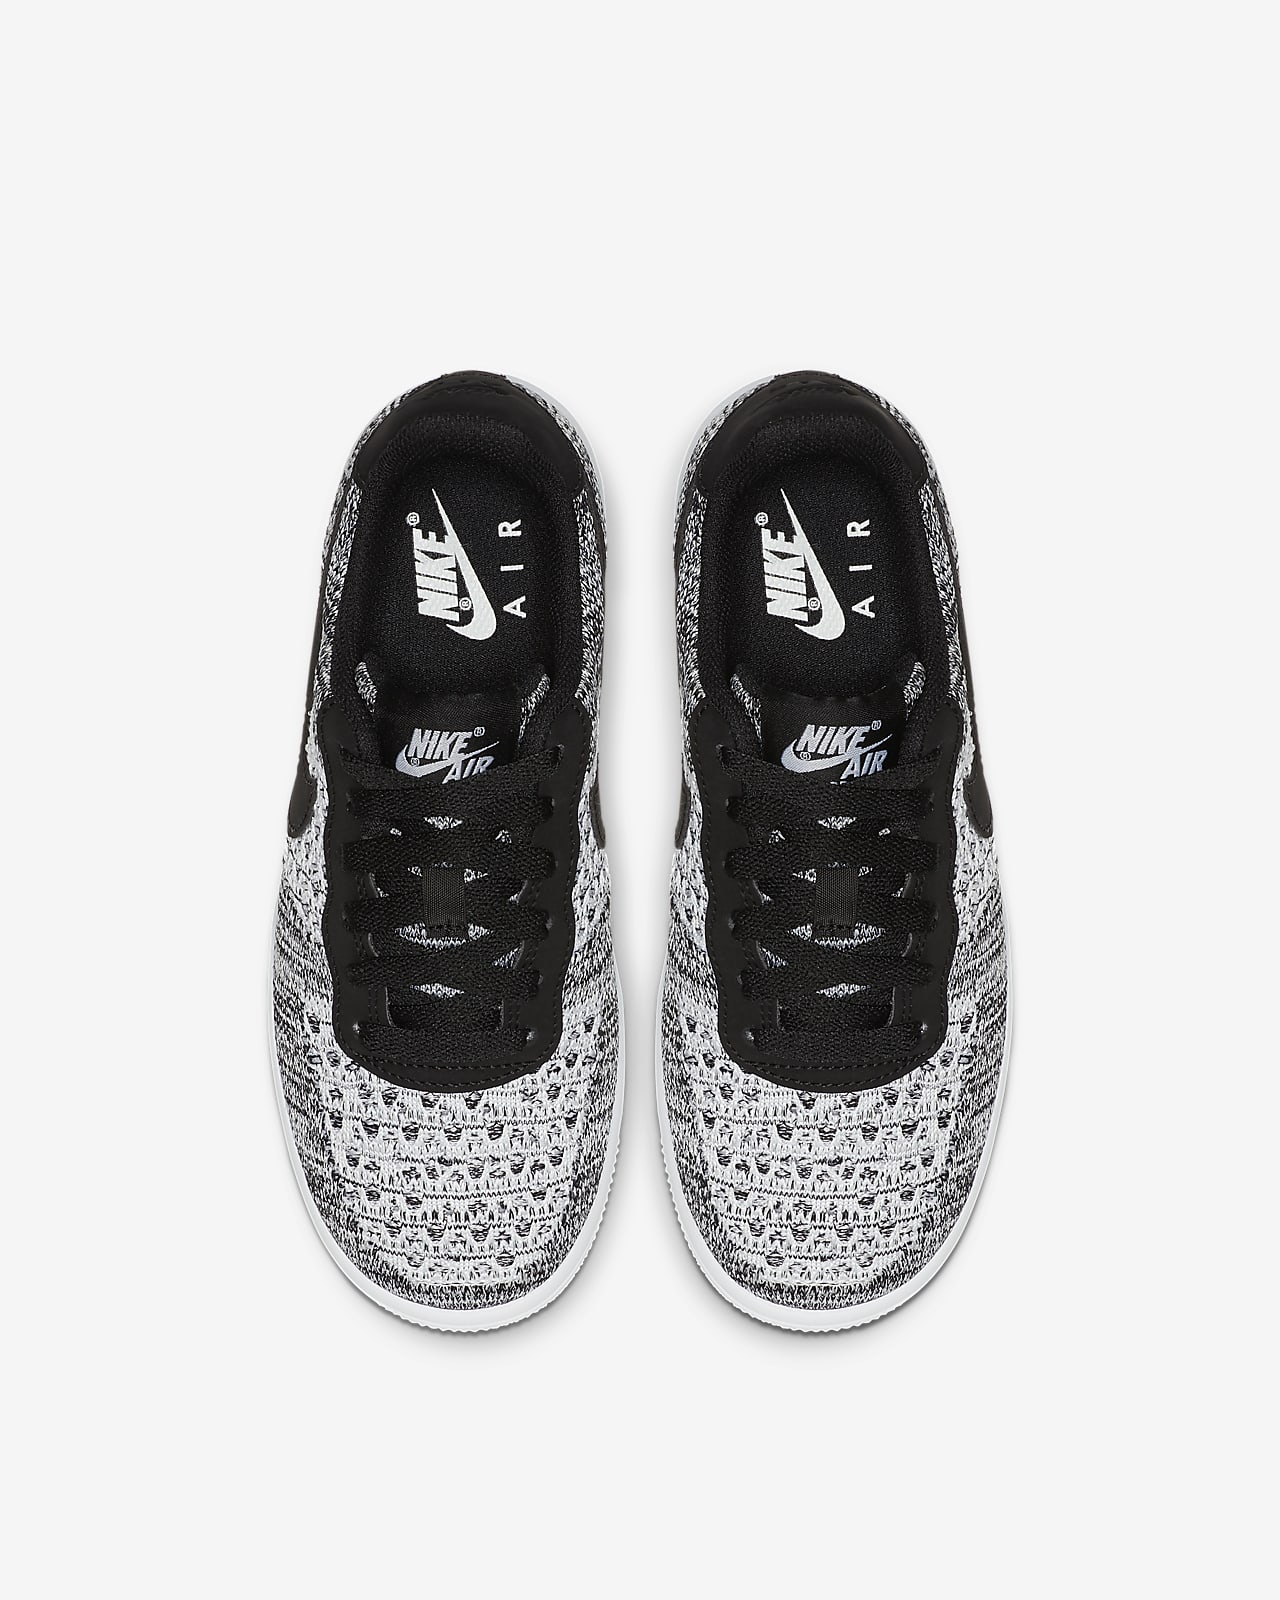 nike air force 1 flyknit 2.0 black and white